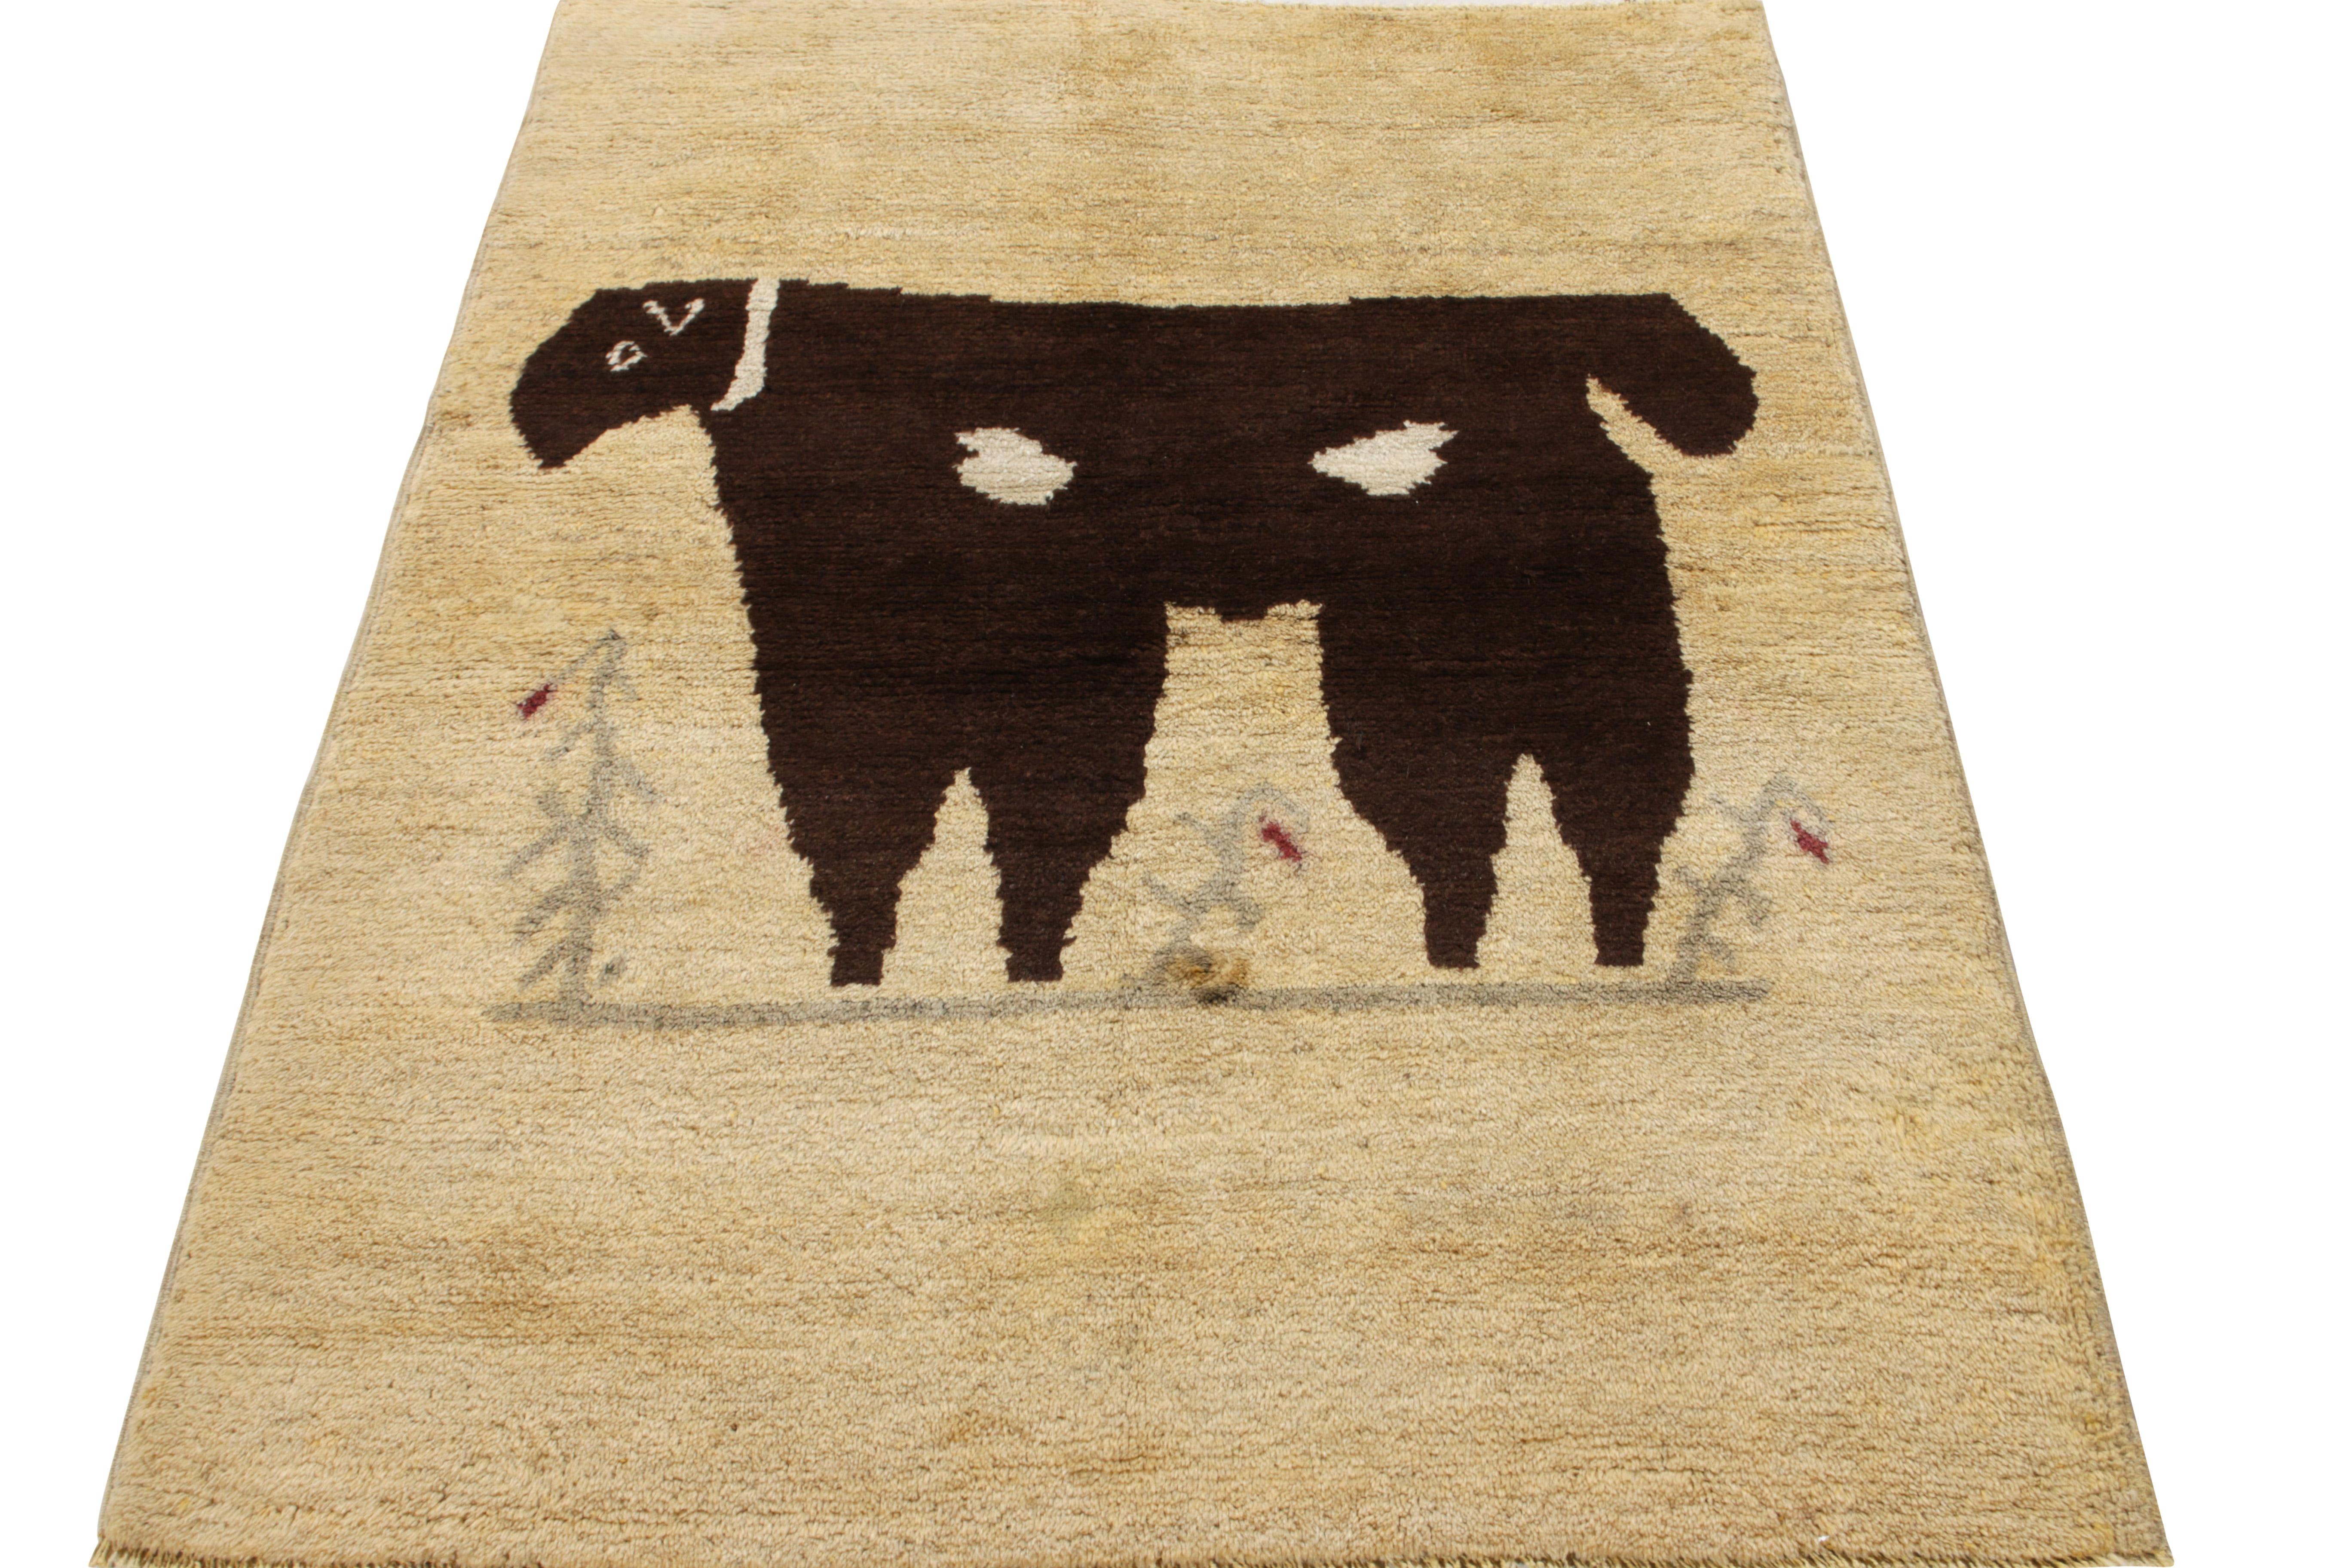 Hand-knotted in wool originating from Turkey circa 1950-1960, a rare vintage mid-century pictorial rug in beige and brown colors. Enjoying a tasteful abrash in the background and field, the medallion pictorial appears to depict a lamb or similar